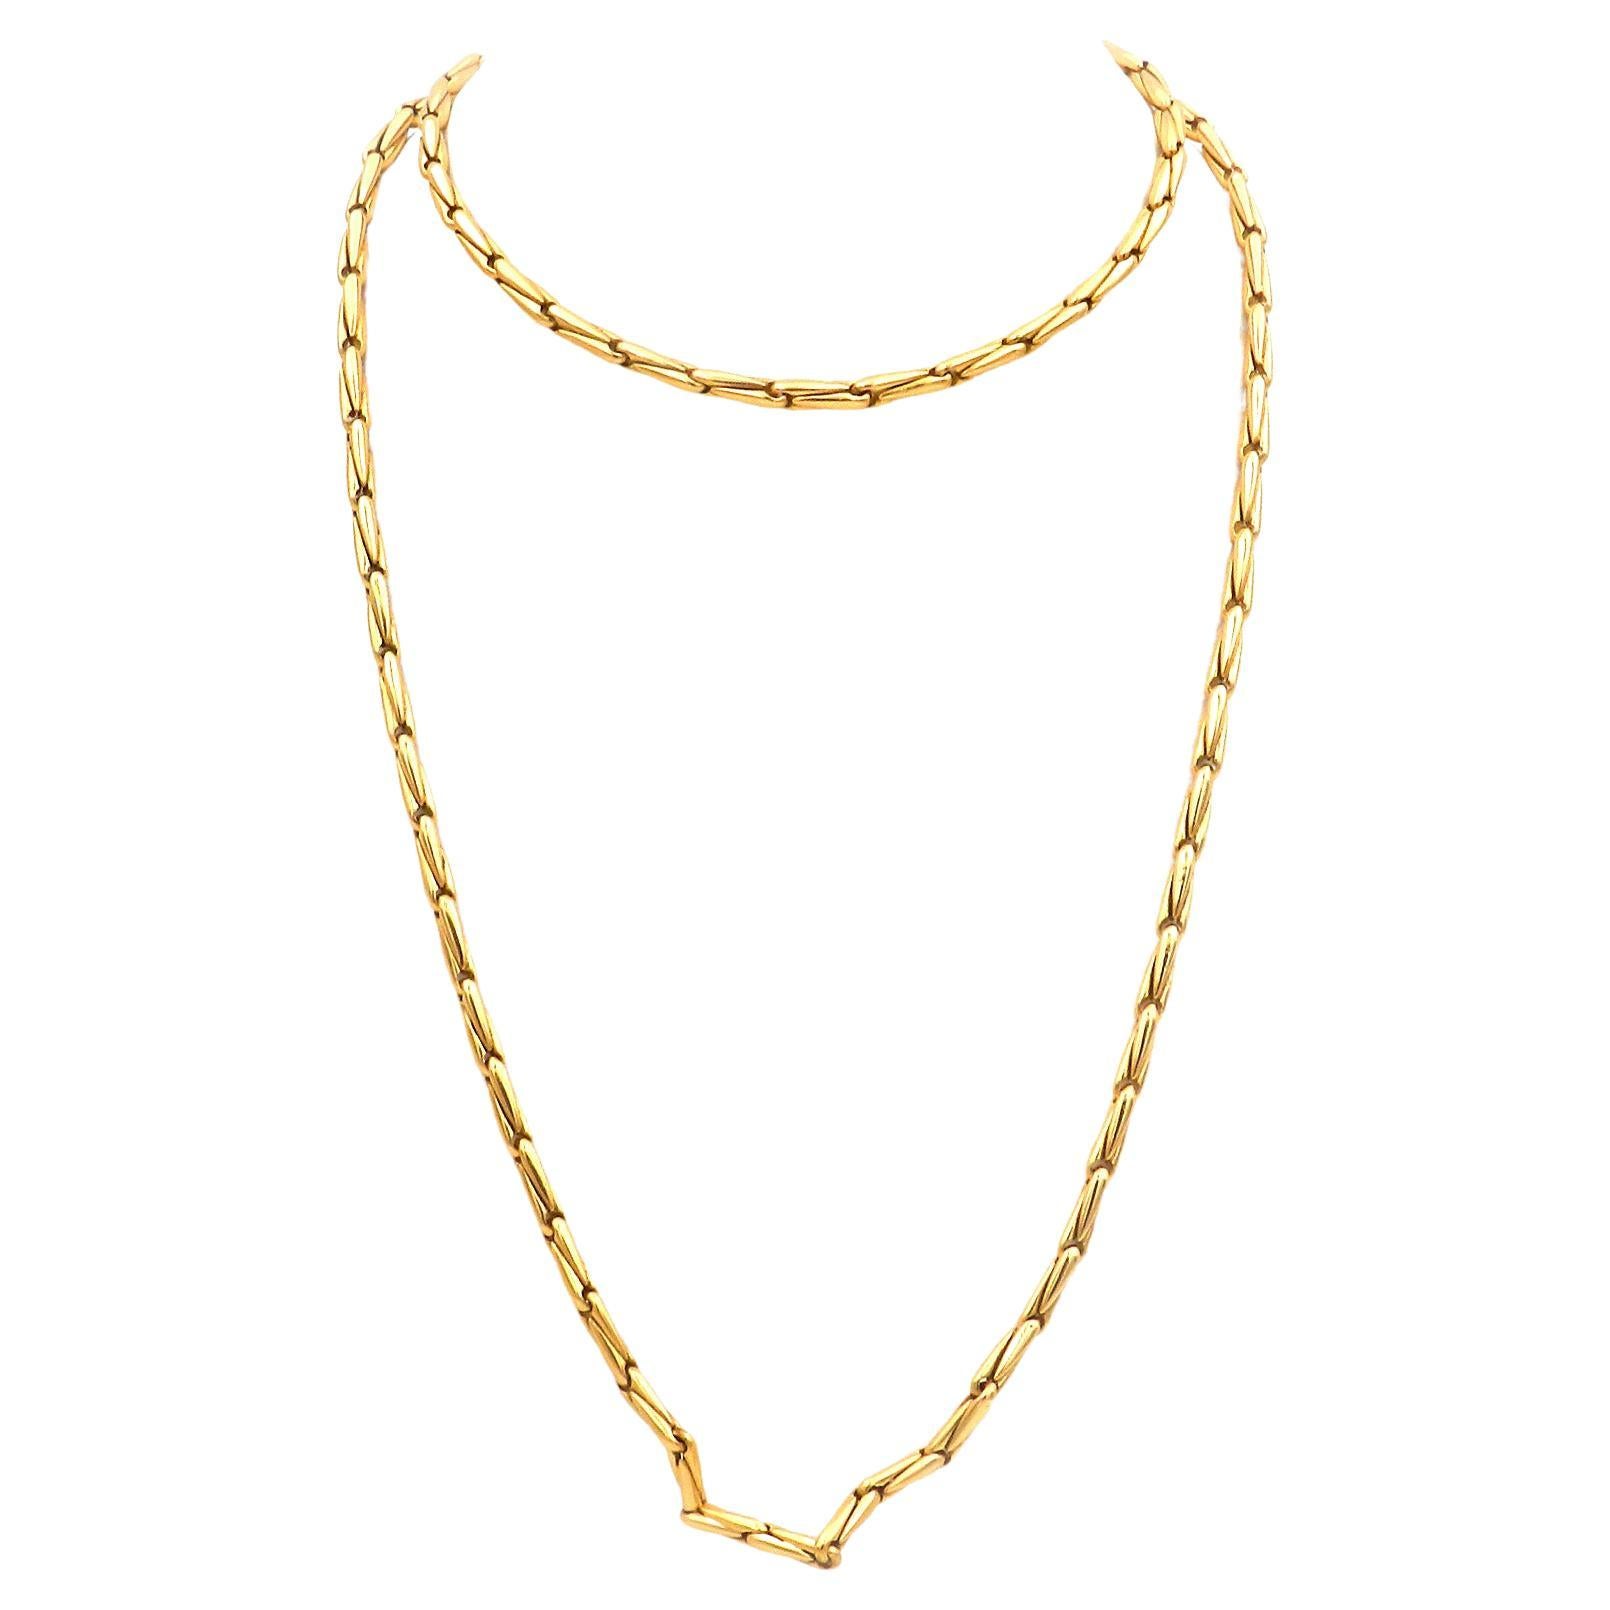 Cartier 18K Yellow Gold Long Chain Necklace

Sporty, elegant gold chain from the traditional Parisian Maison Cartier. High-quality workmanship with a lovely weight, made of solid, rod-shaped links in rich 18K gold. Signed and numbered.

 

750/18K